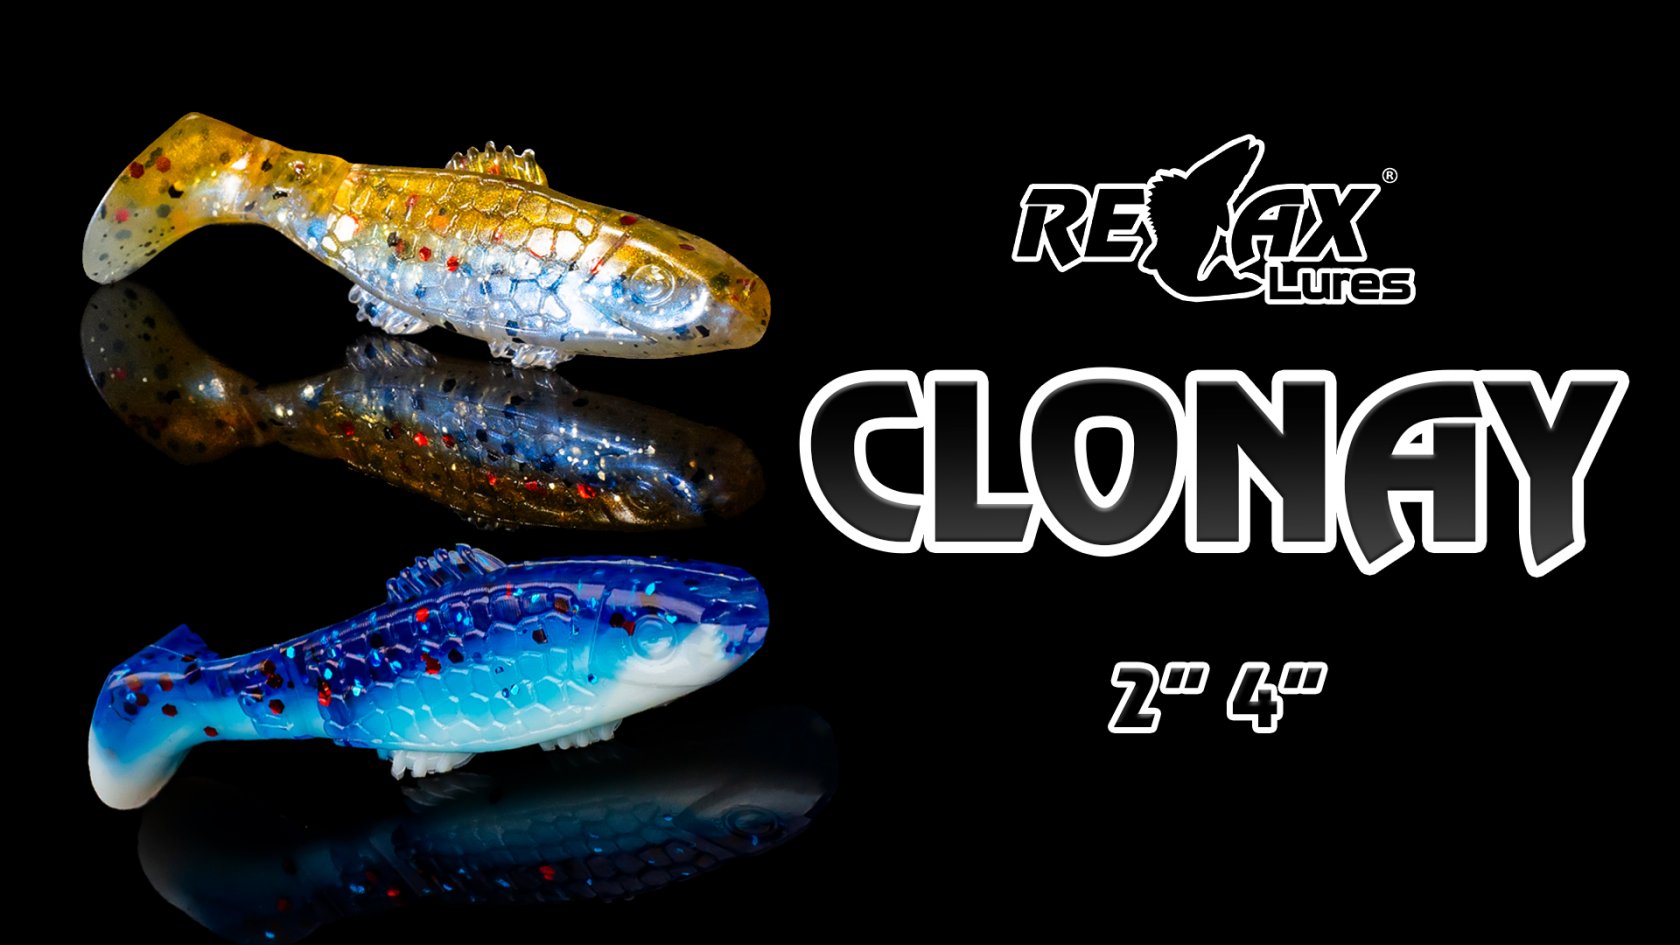 PERCH, BASS LURE - MUST HAVE - CLONAY